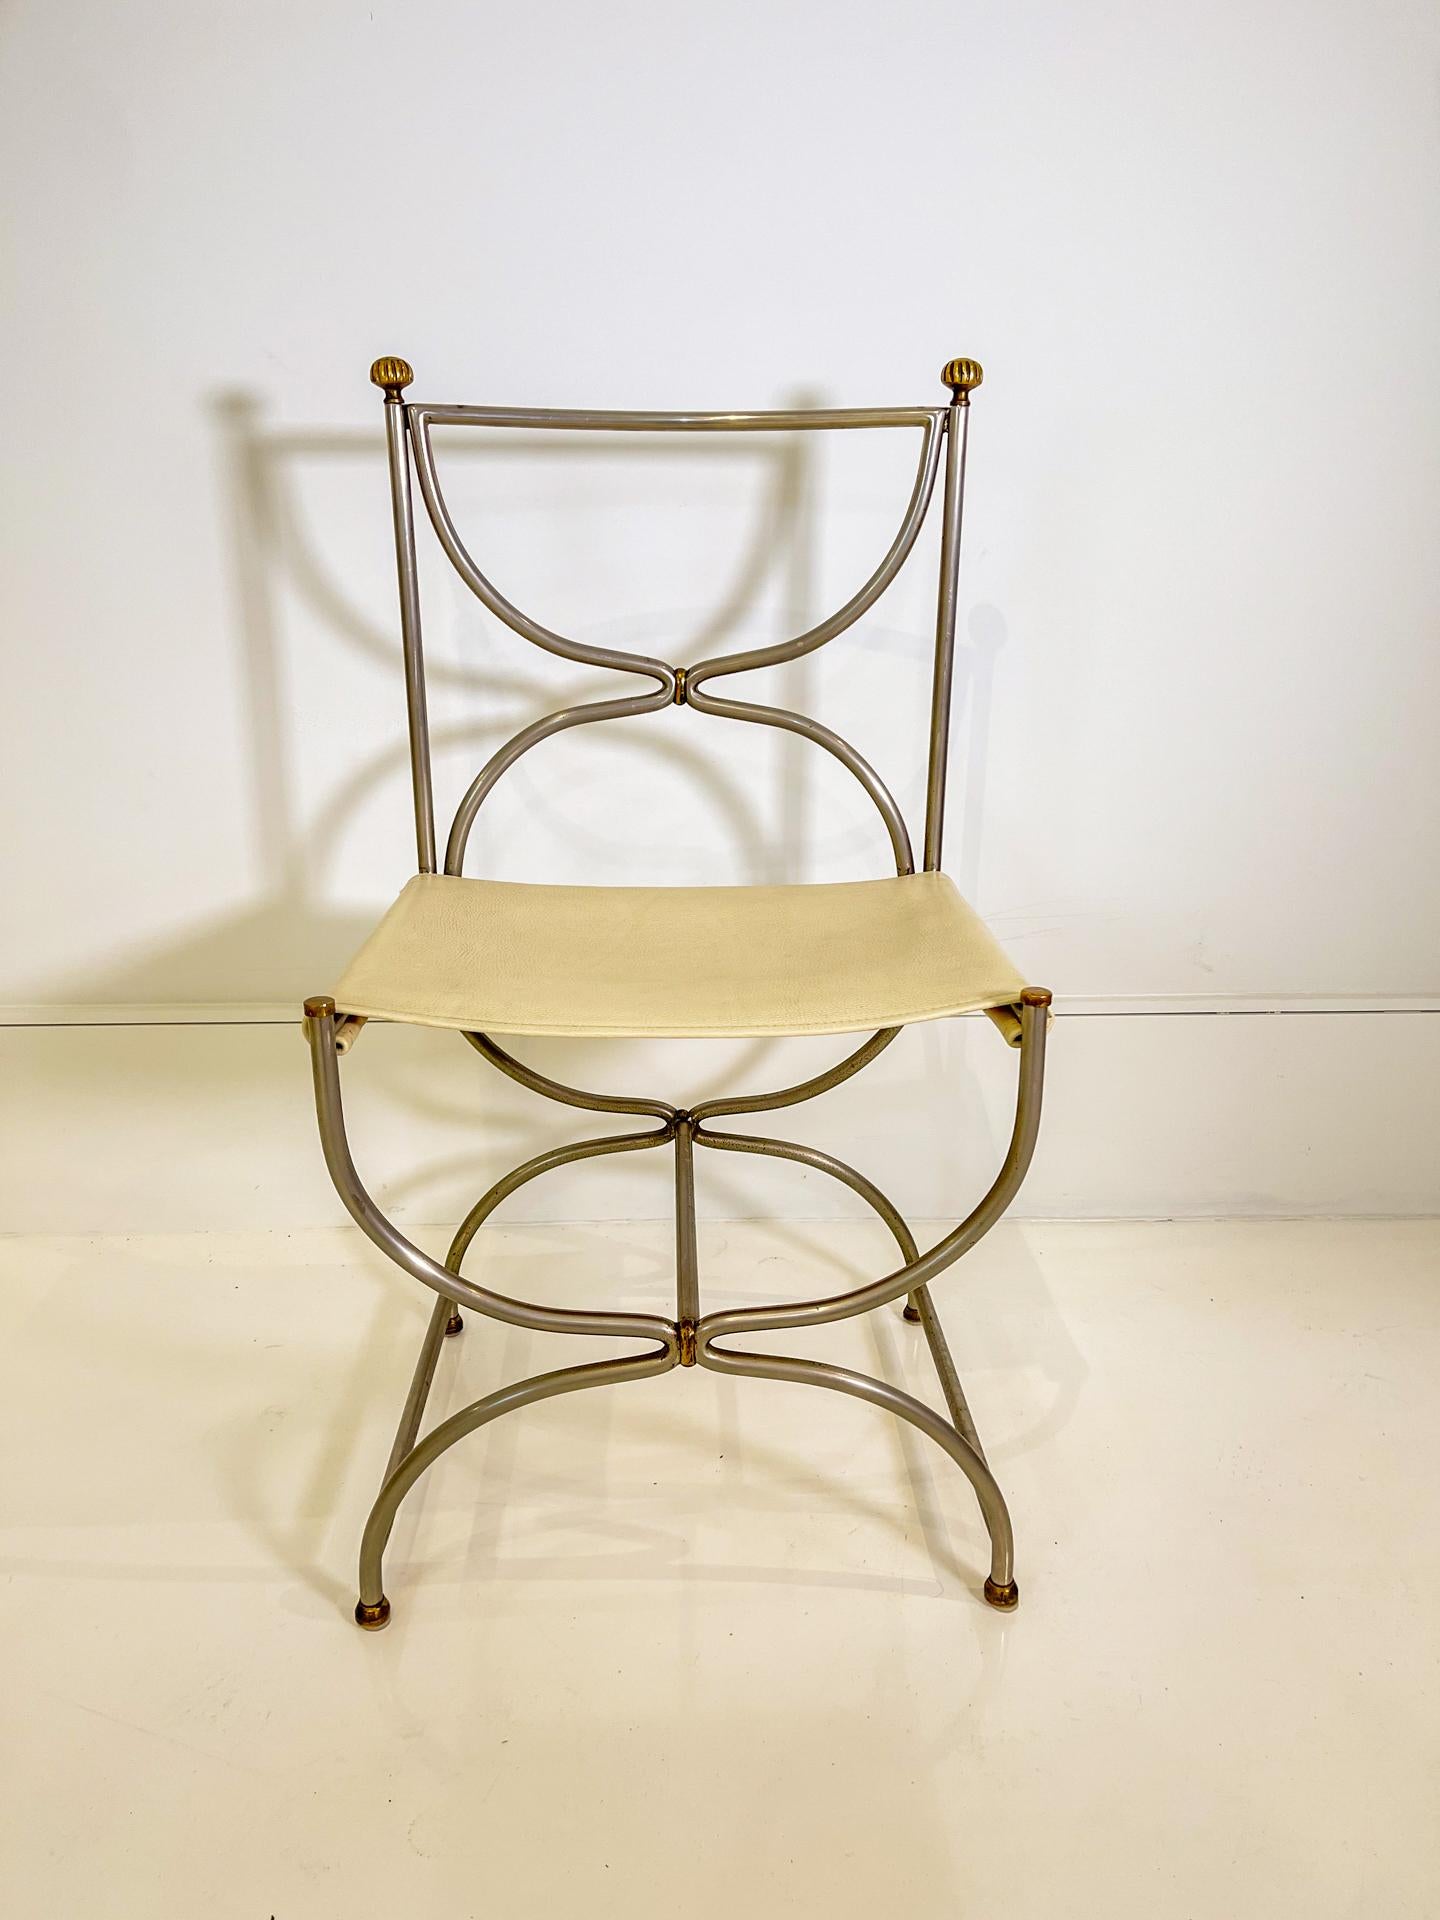 Maison Jansen was founded in 1880 by Dutch born Jean-Henri Jansen. Headquartered in Paris, it became the design center for the elite.
This set of six Savonarola chairs are a fine example of his elegant and timeless style.